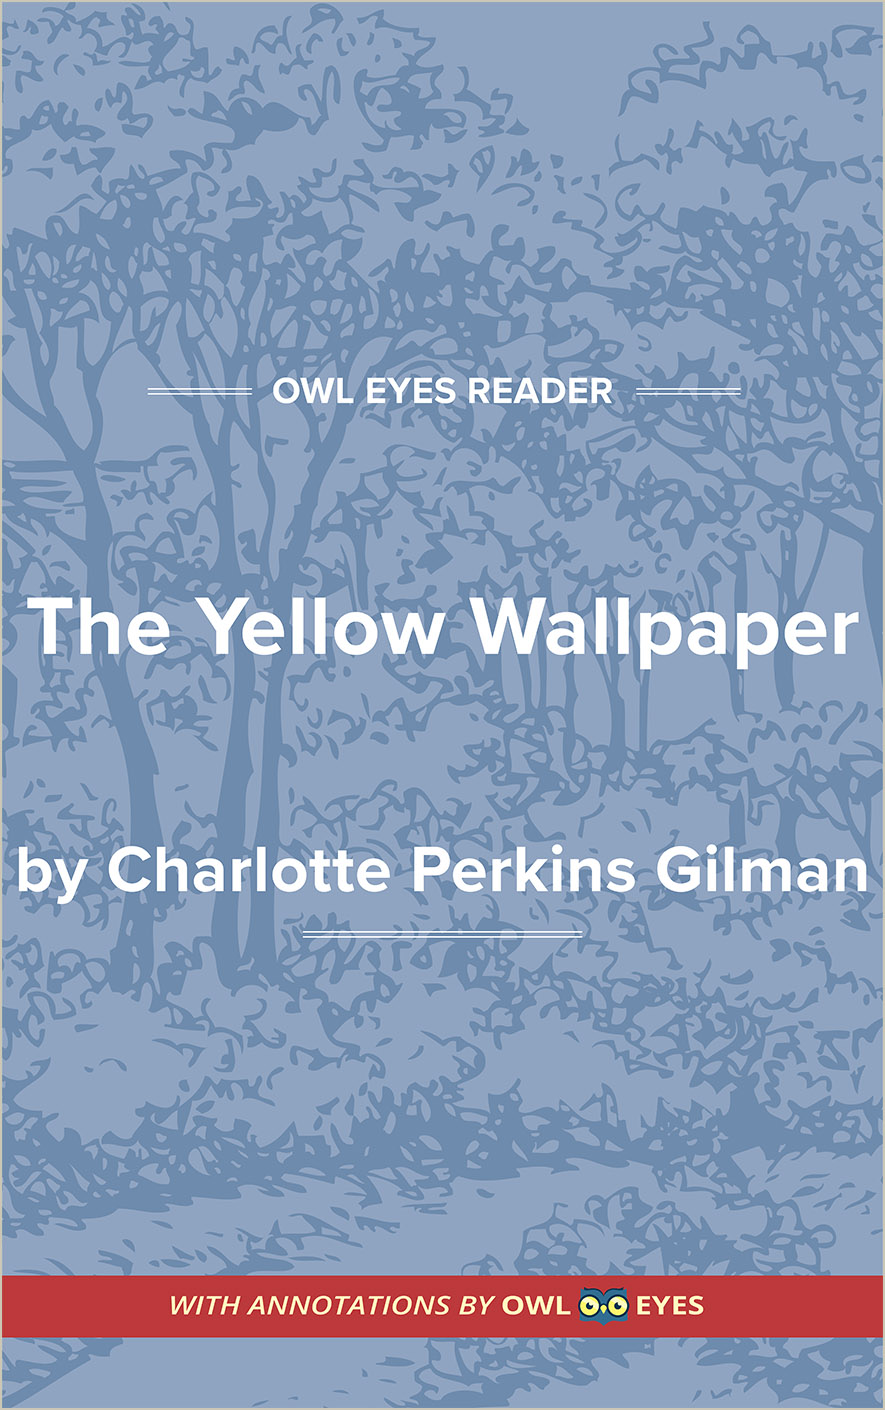 Character analysis in the yellow wallpaper